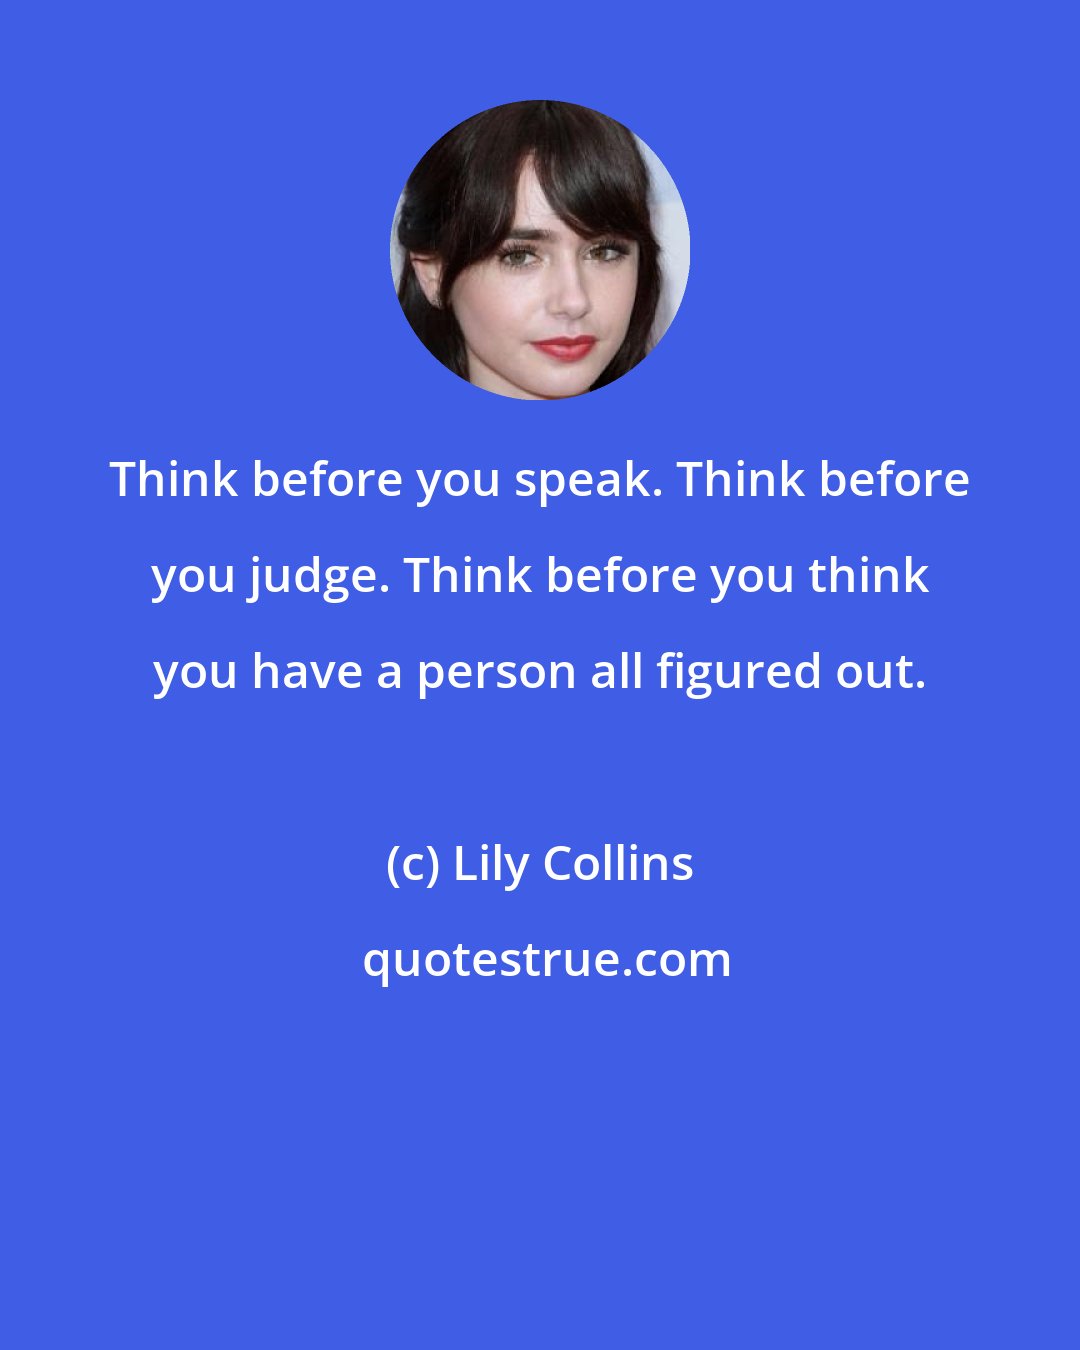 Lily Collins: Think before you speak. Think before you judge. Think before you think you have a person all figured out.